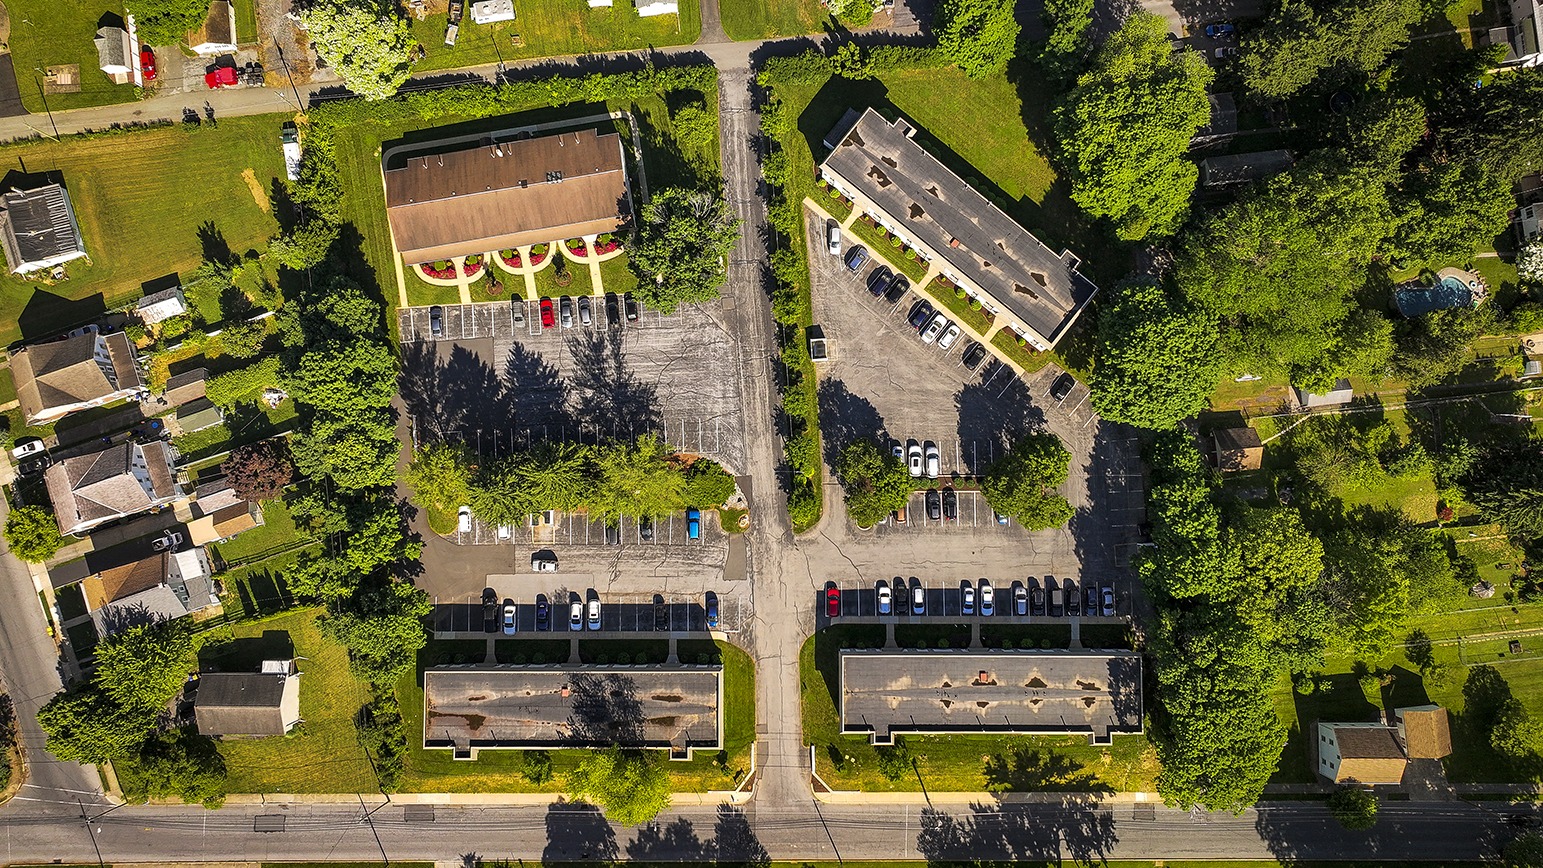 Overhead exterior view of Park Court apartments, lawns and trees